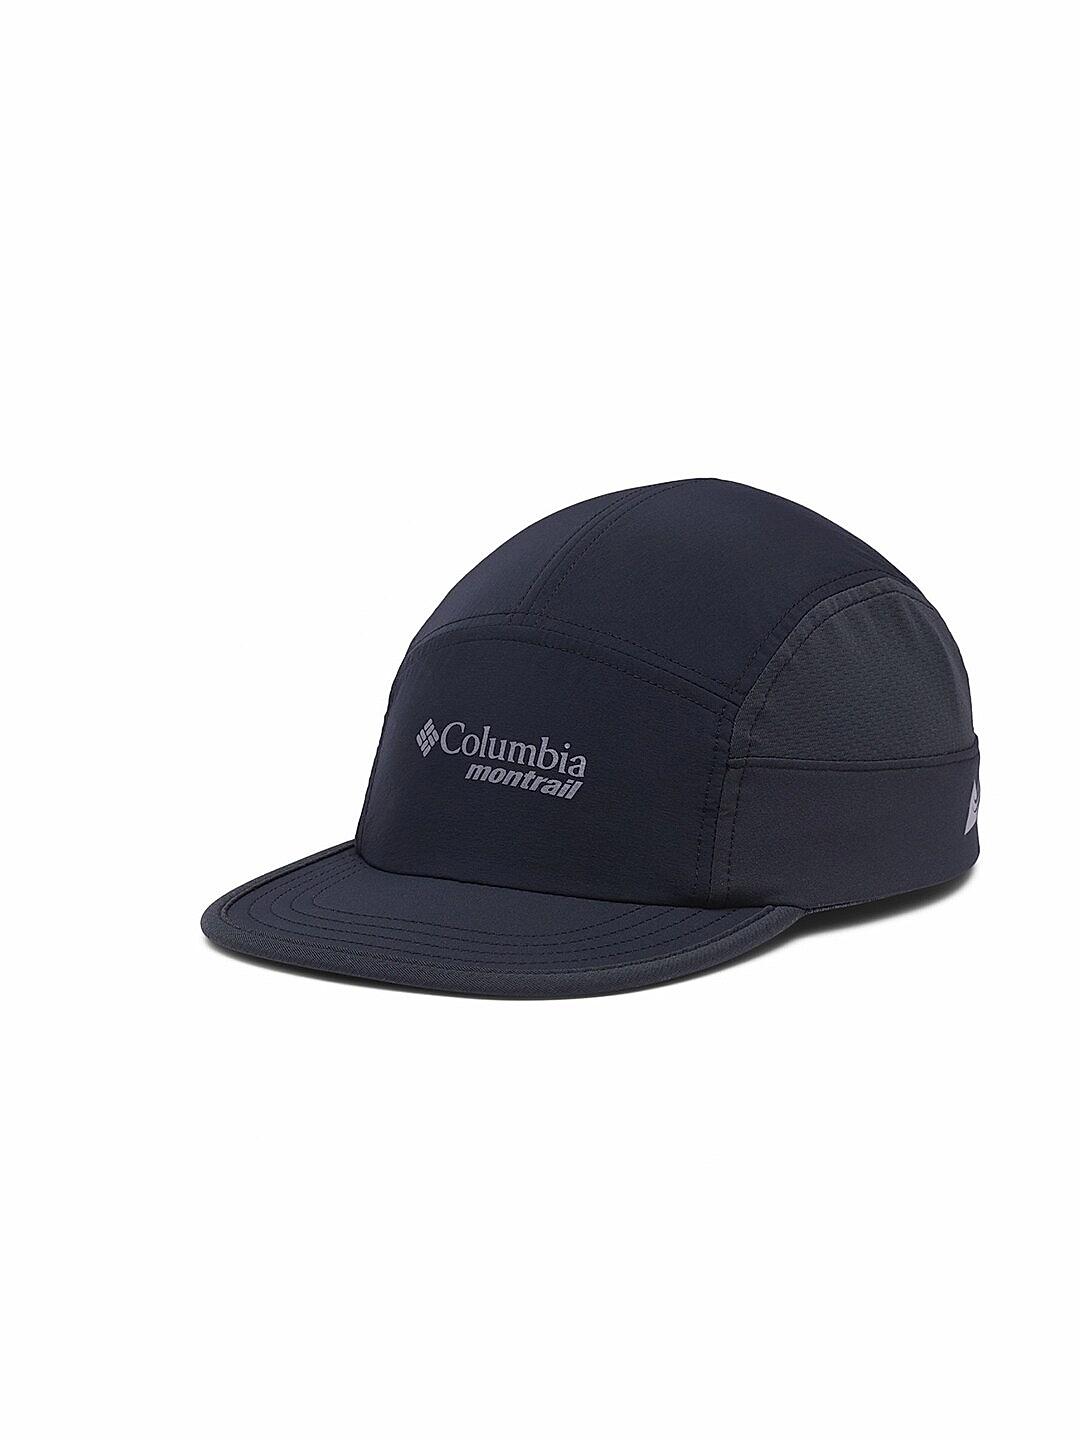 Buy Black Escape Thrive Cap for Men and Women Online at Columbia Sportswear